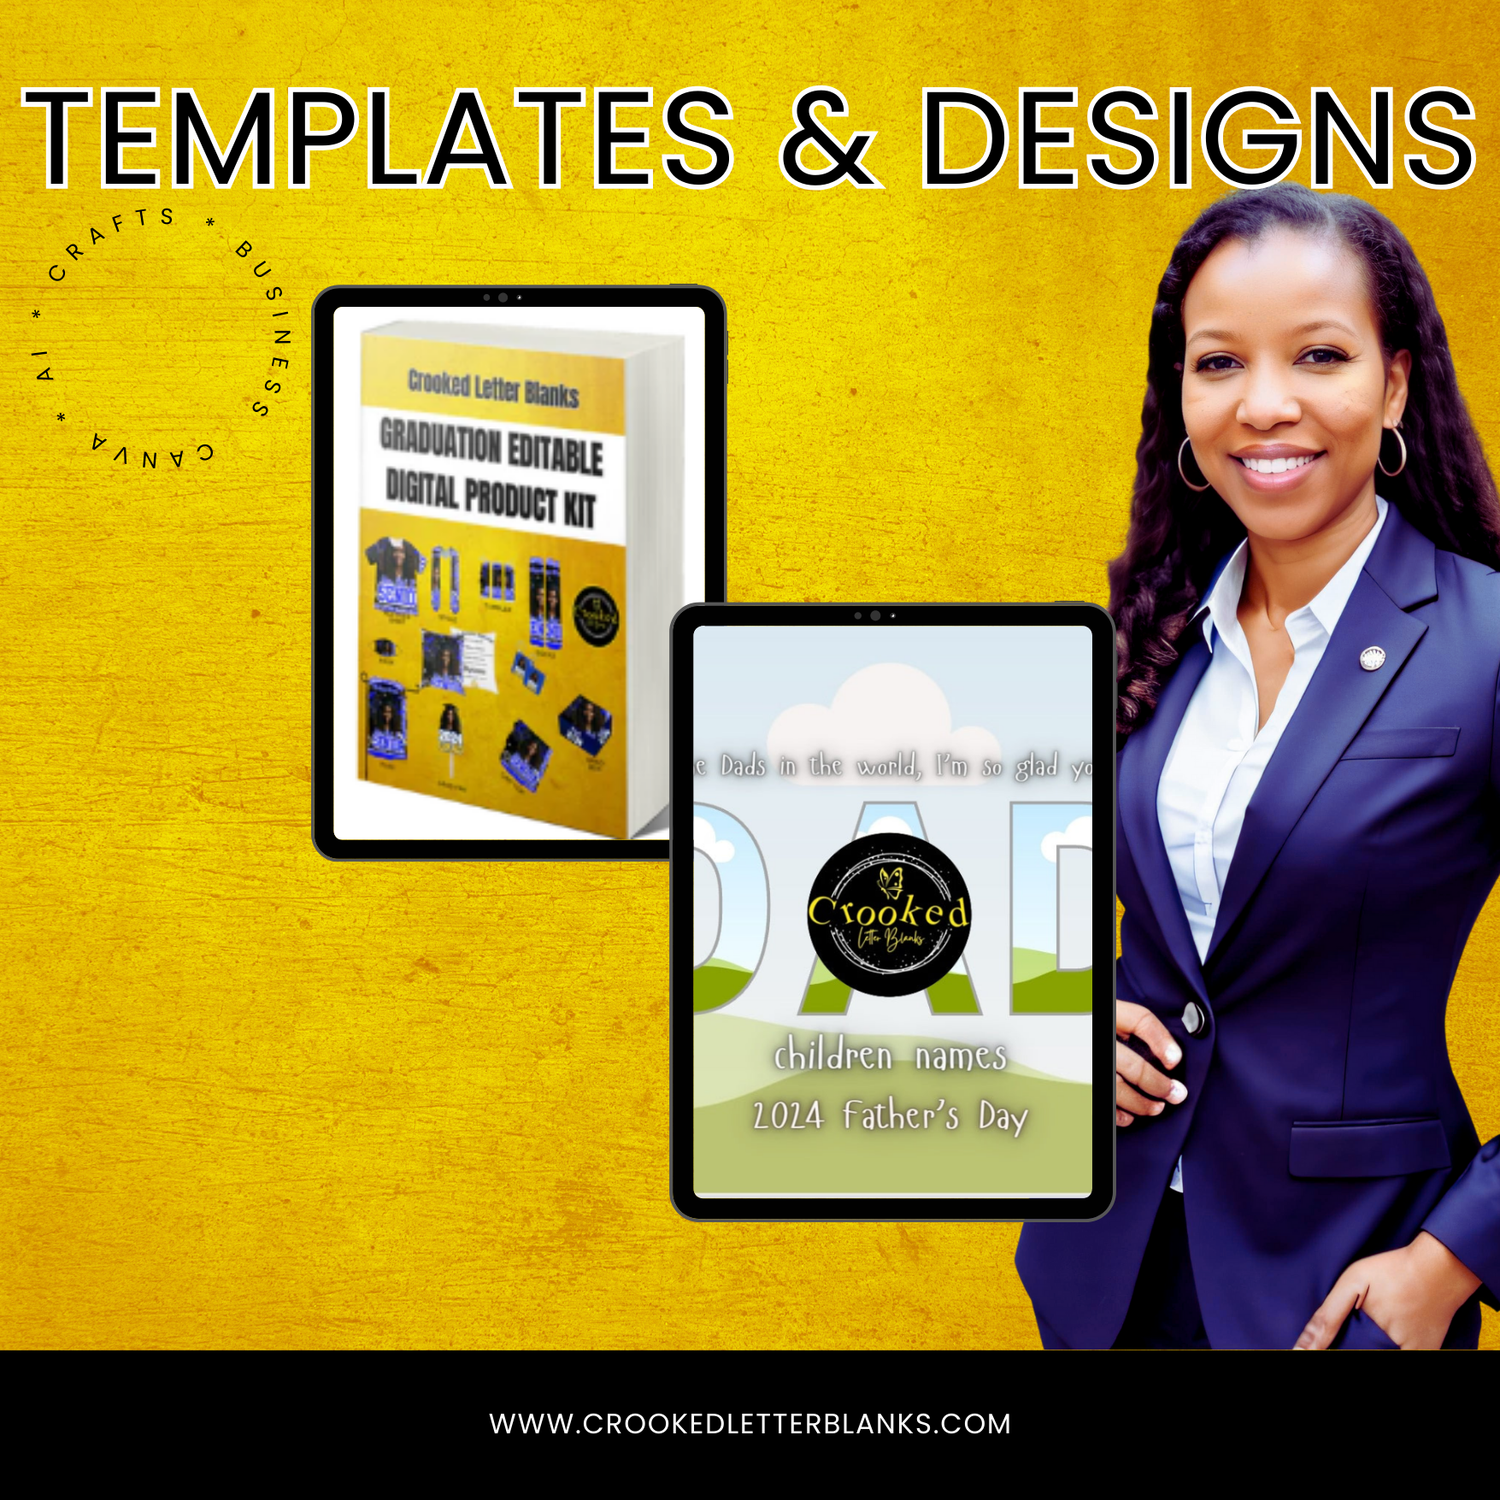 Templates and Designs